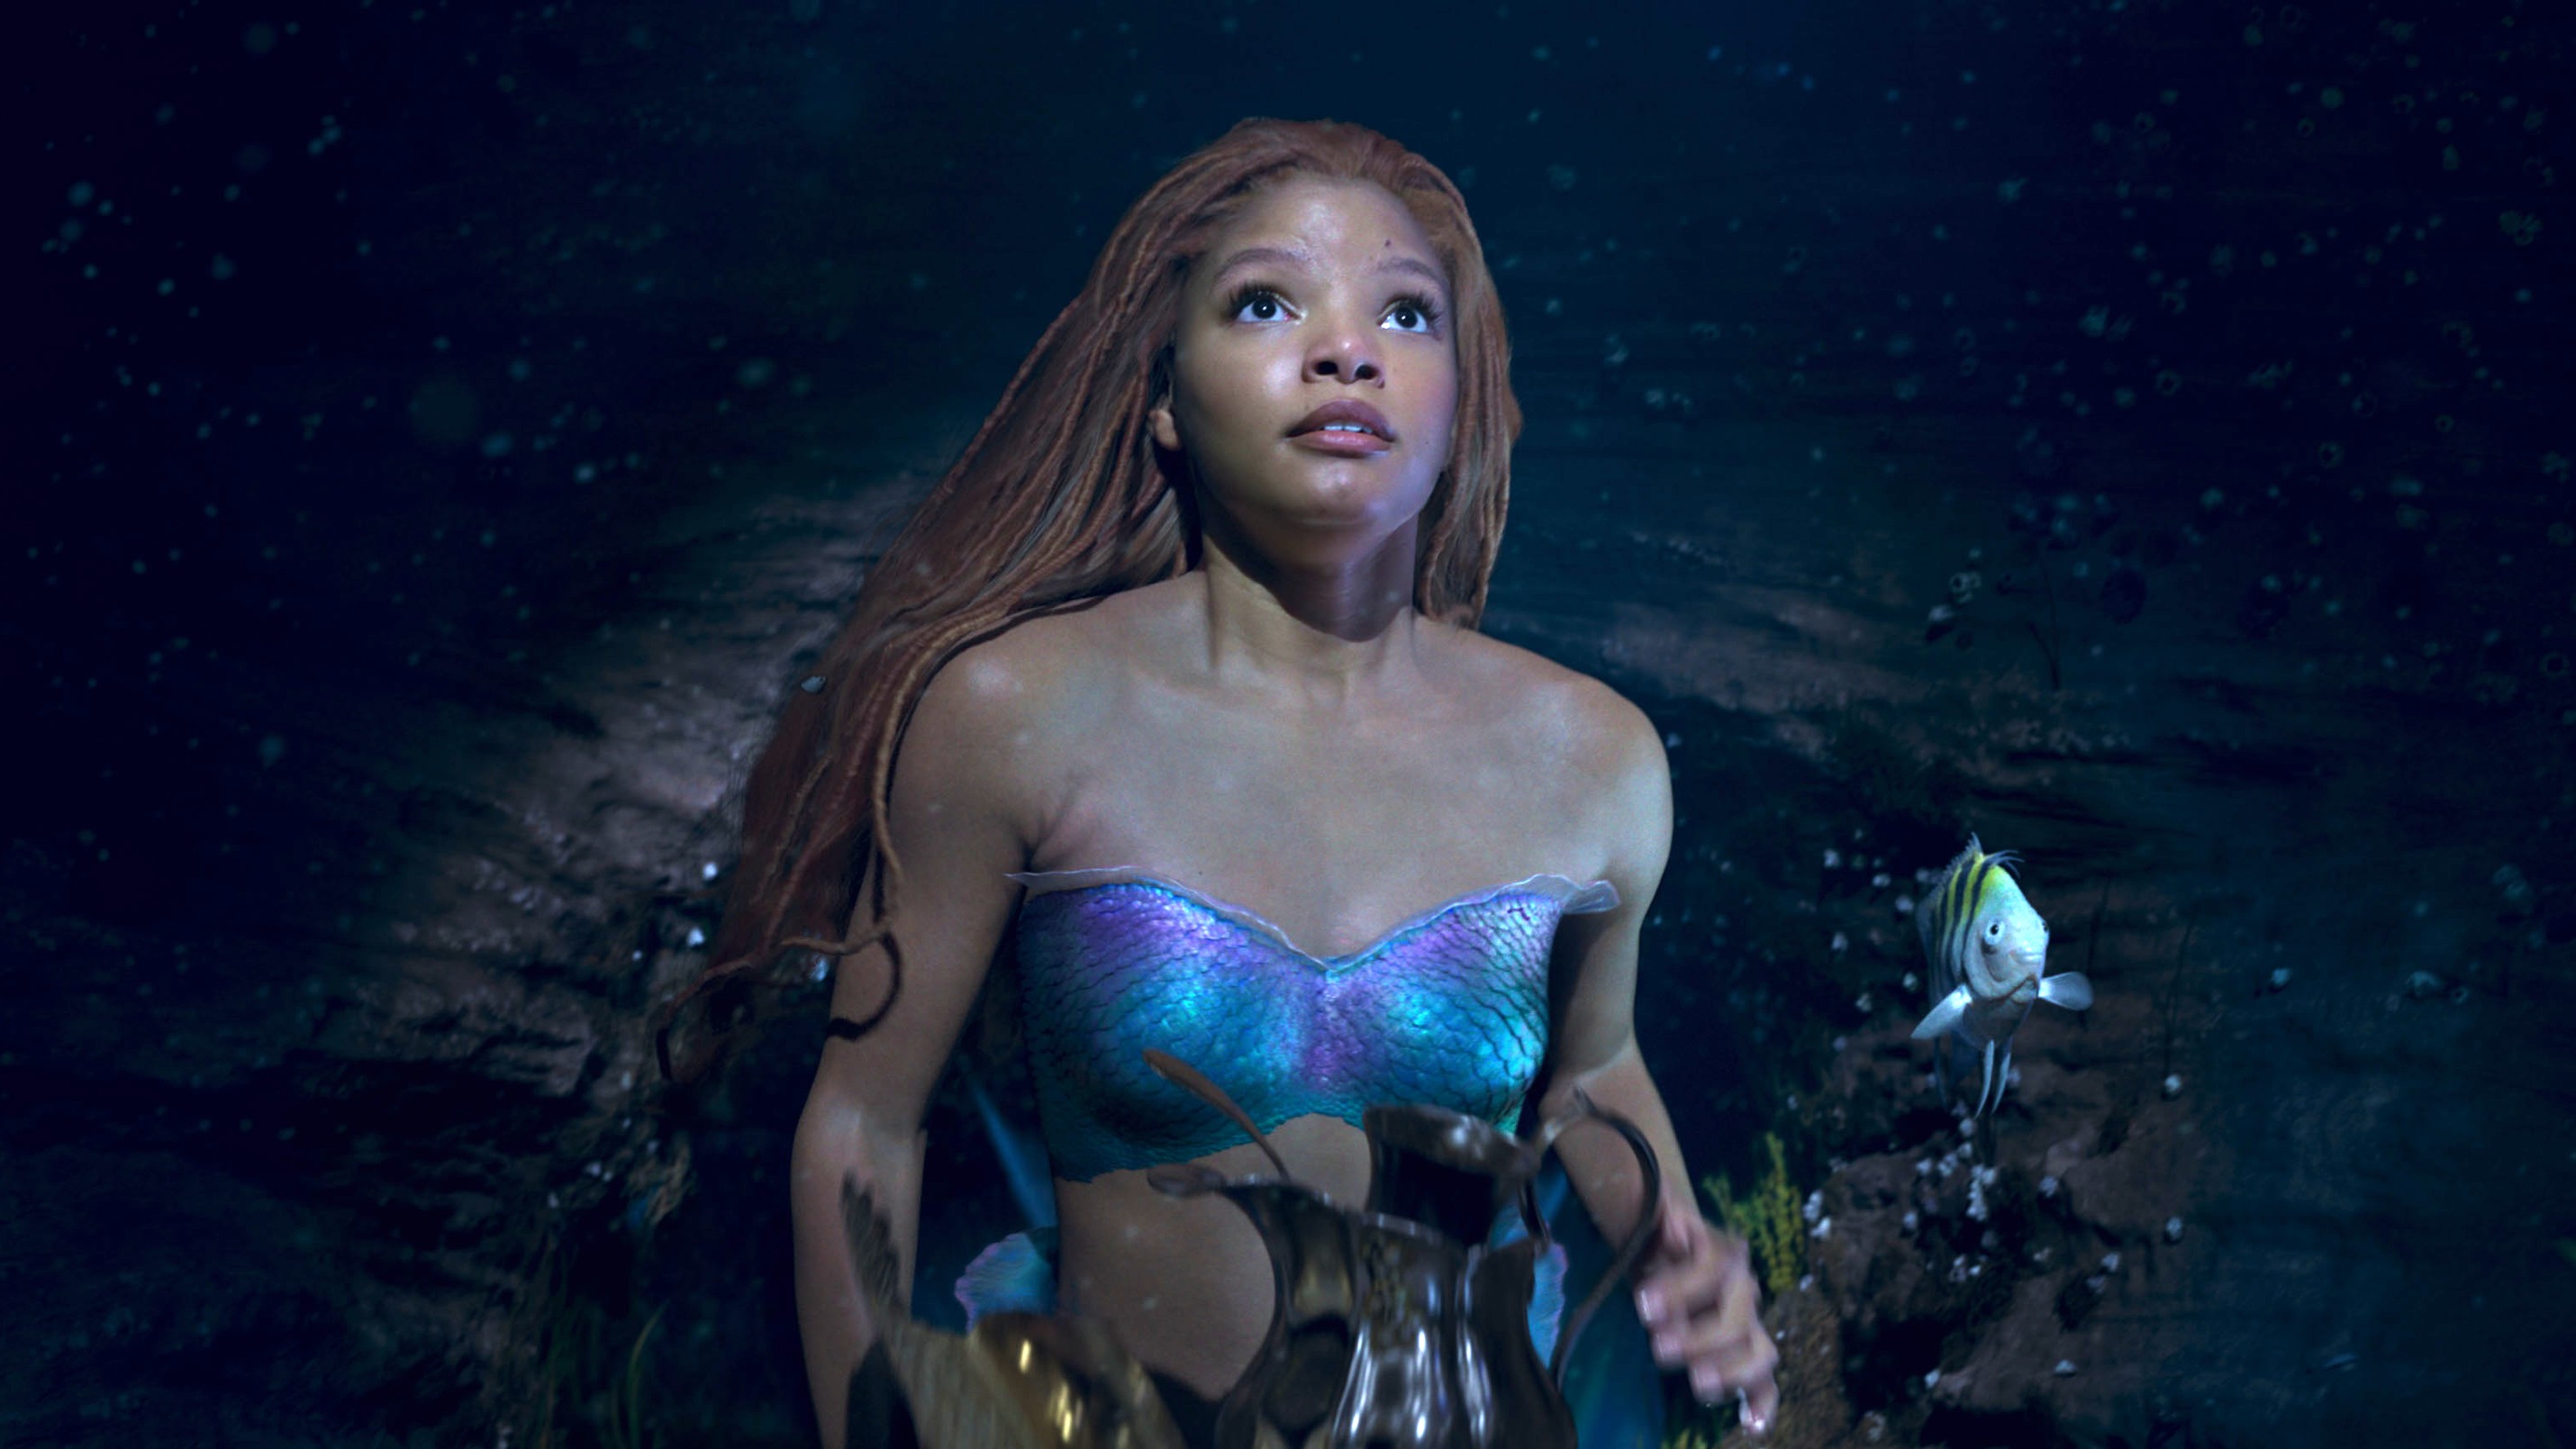 How The Little Mermaid Reimagined Ariel's Classic Songs for Live Action